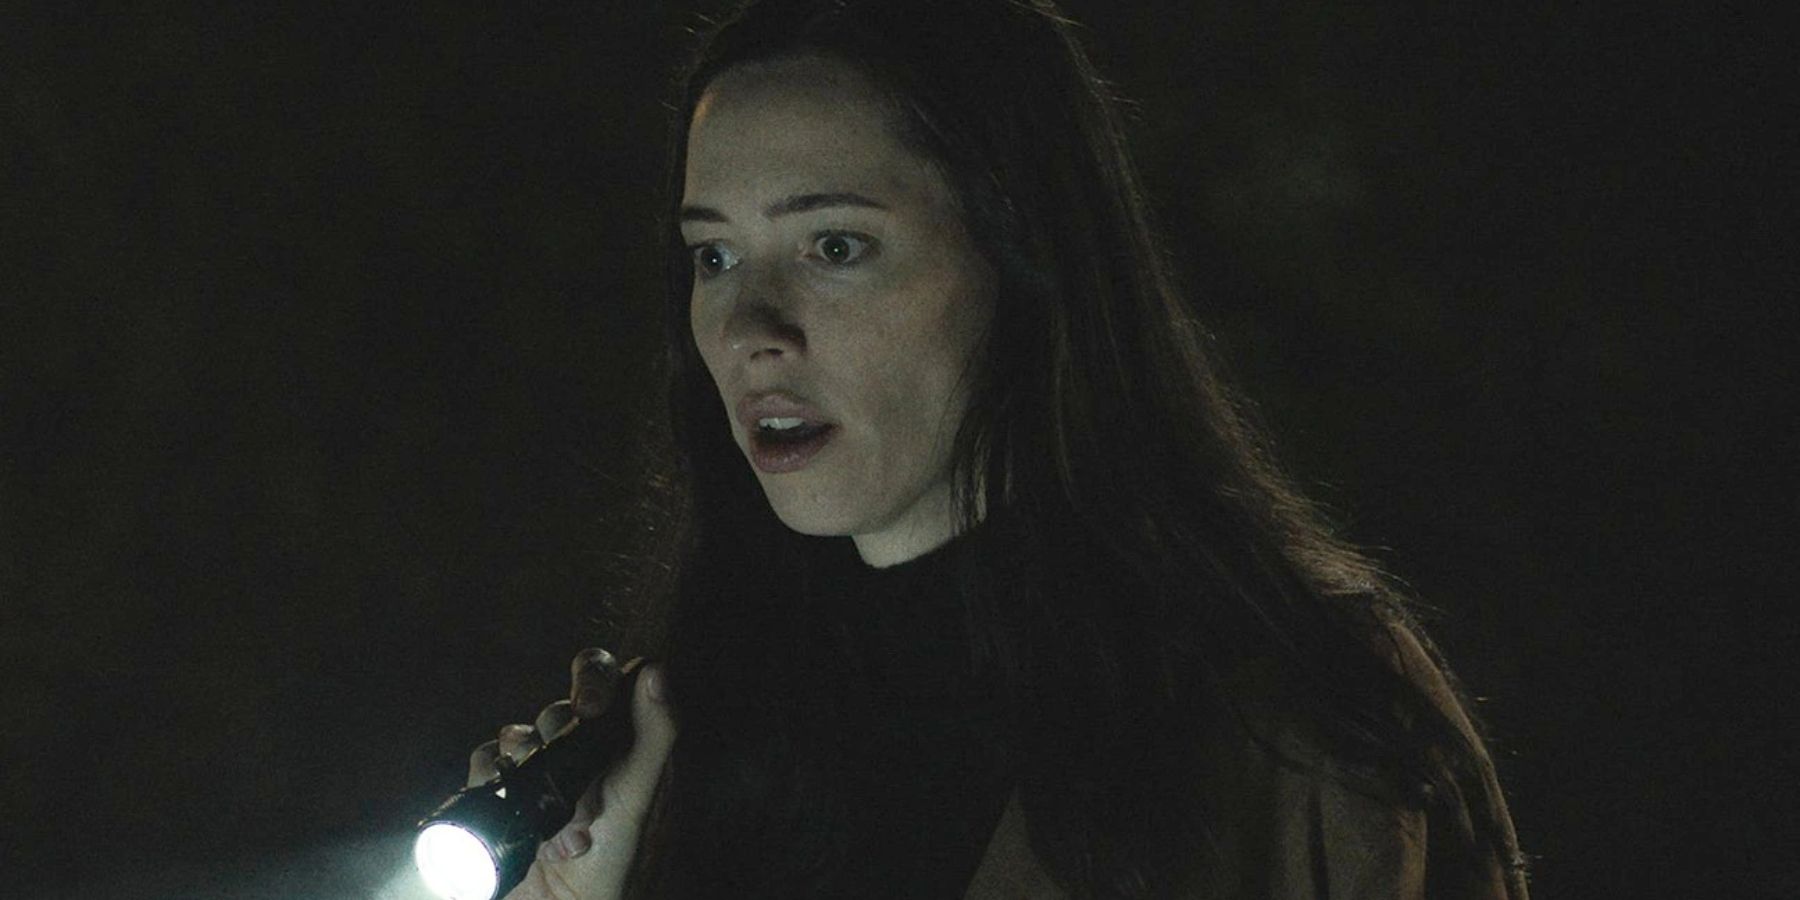 Beth (Rebecca Hall) in The Night House